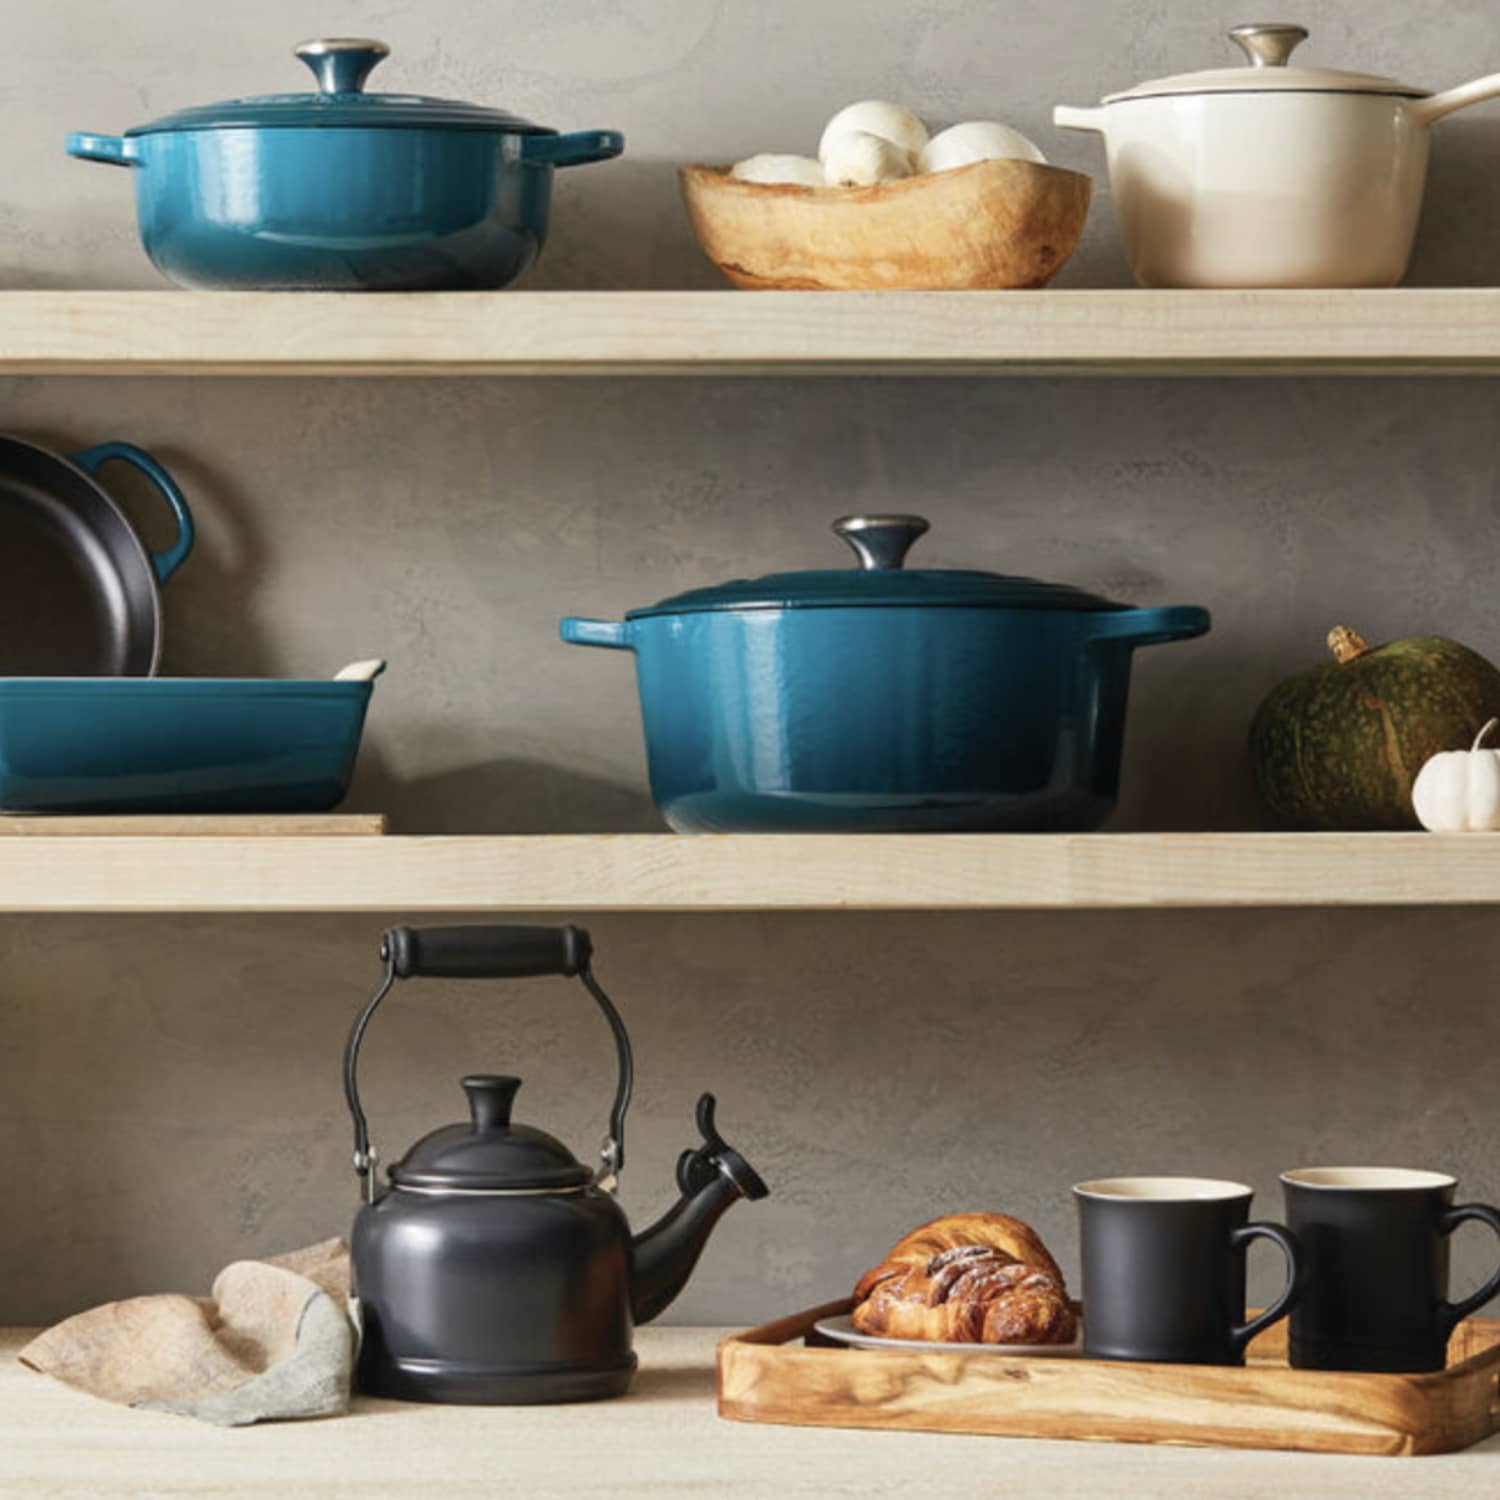 https://cdn.apartmenttherapy.info/image/upload/f_jpg,q_auto:eco,c_fill,g_auto,w_1500,ar_1:1/at%2Fle-creuset-as-decor